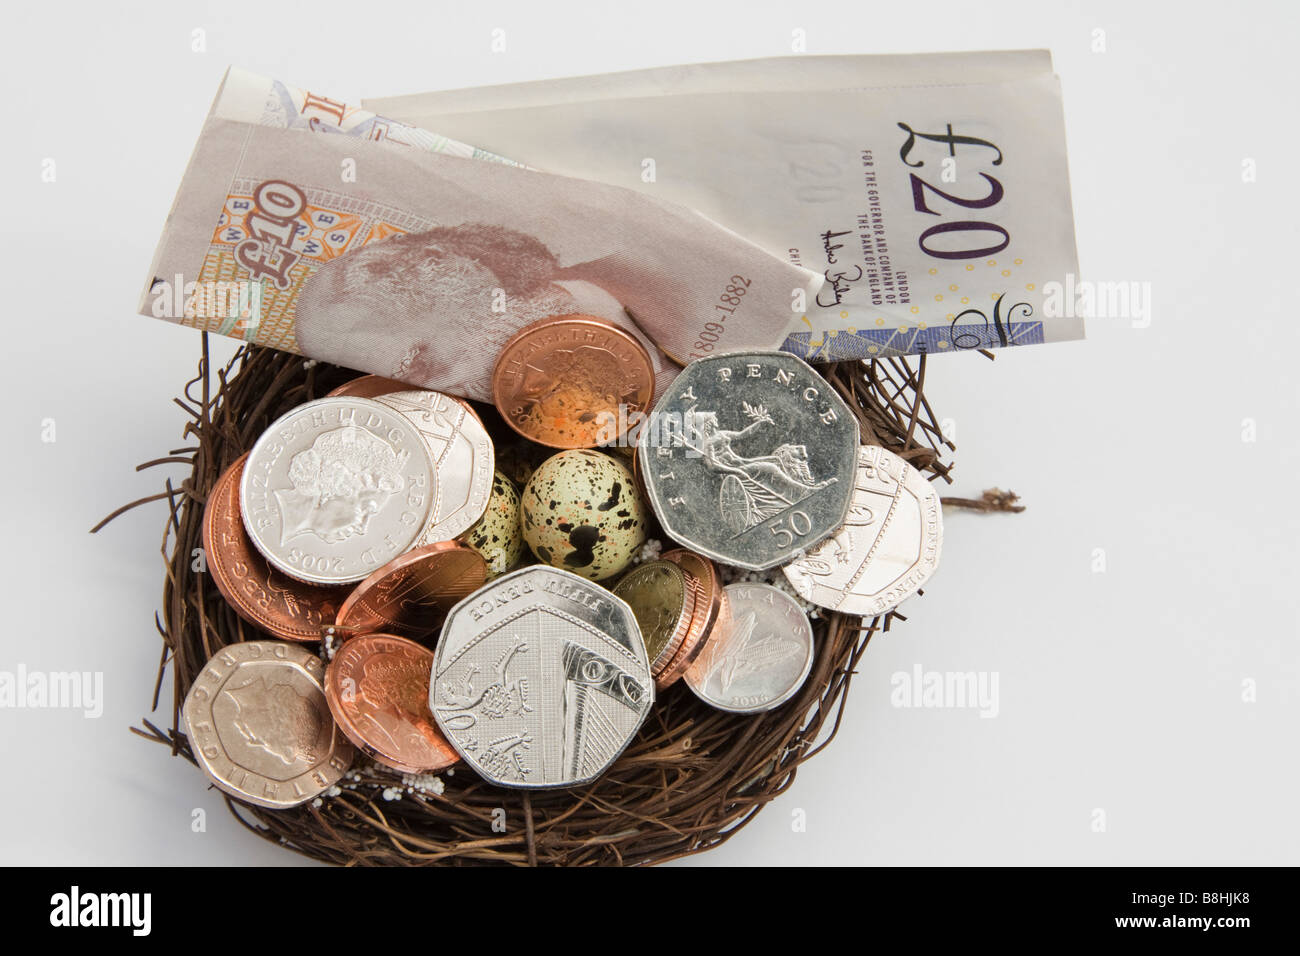 Pile of UK money in various denominations on an artificial nest with eggs from above. England Britain Stock Photo